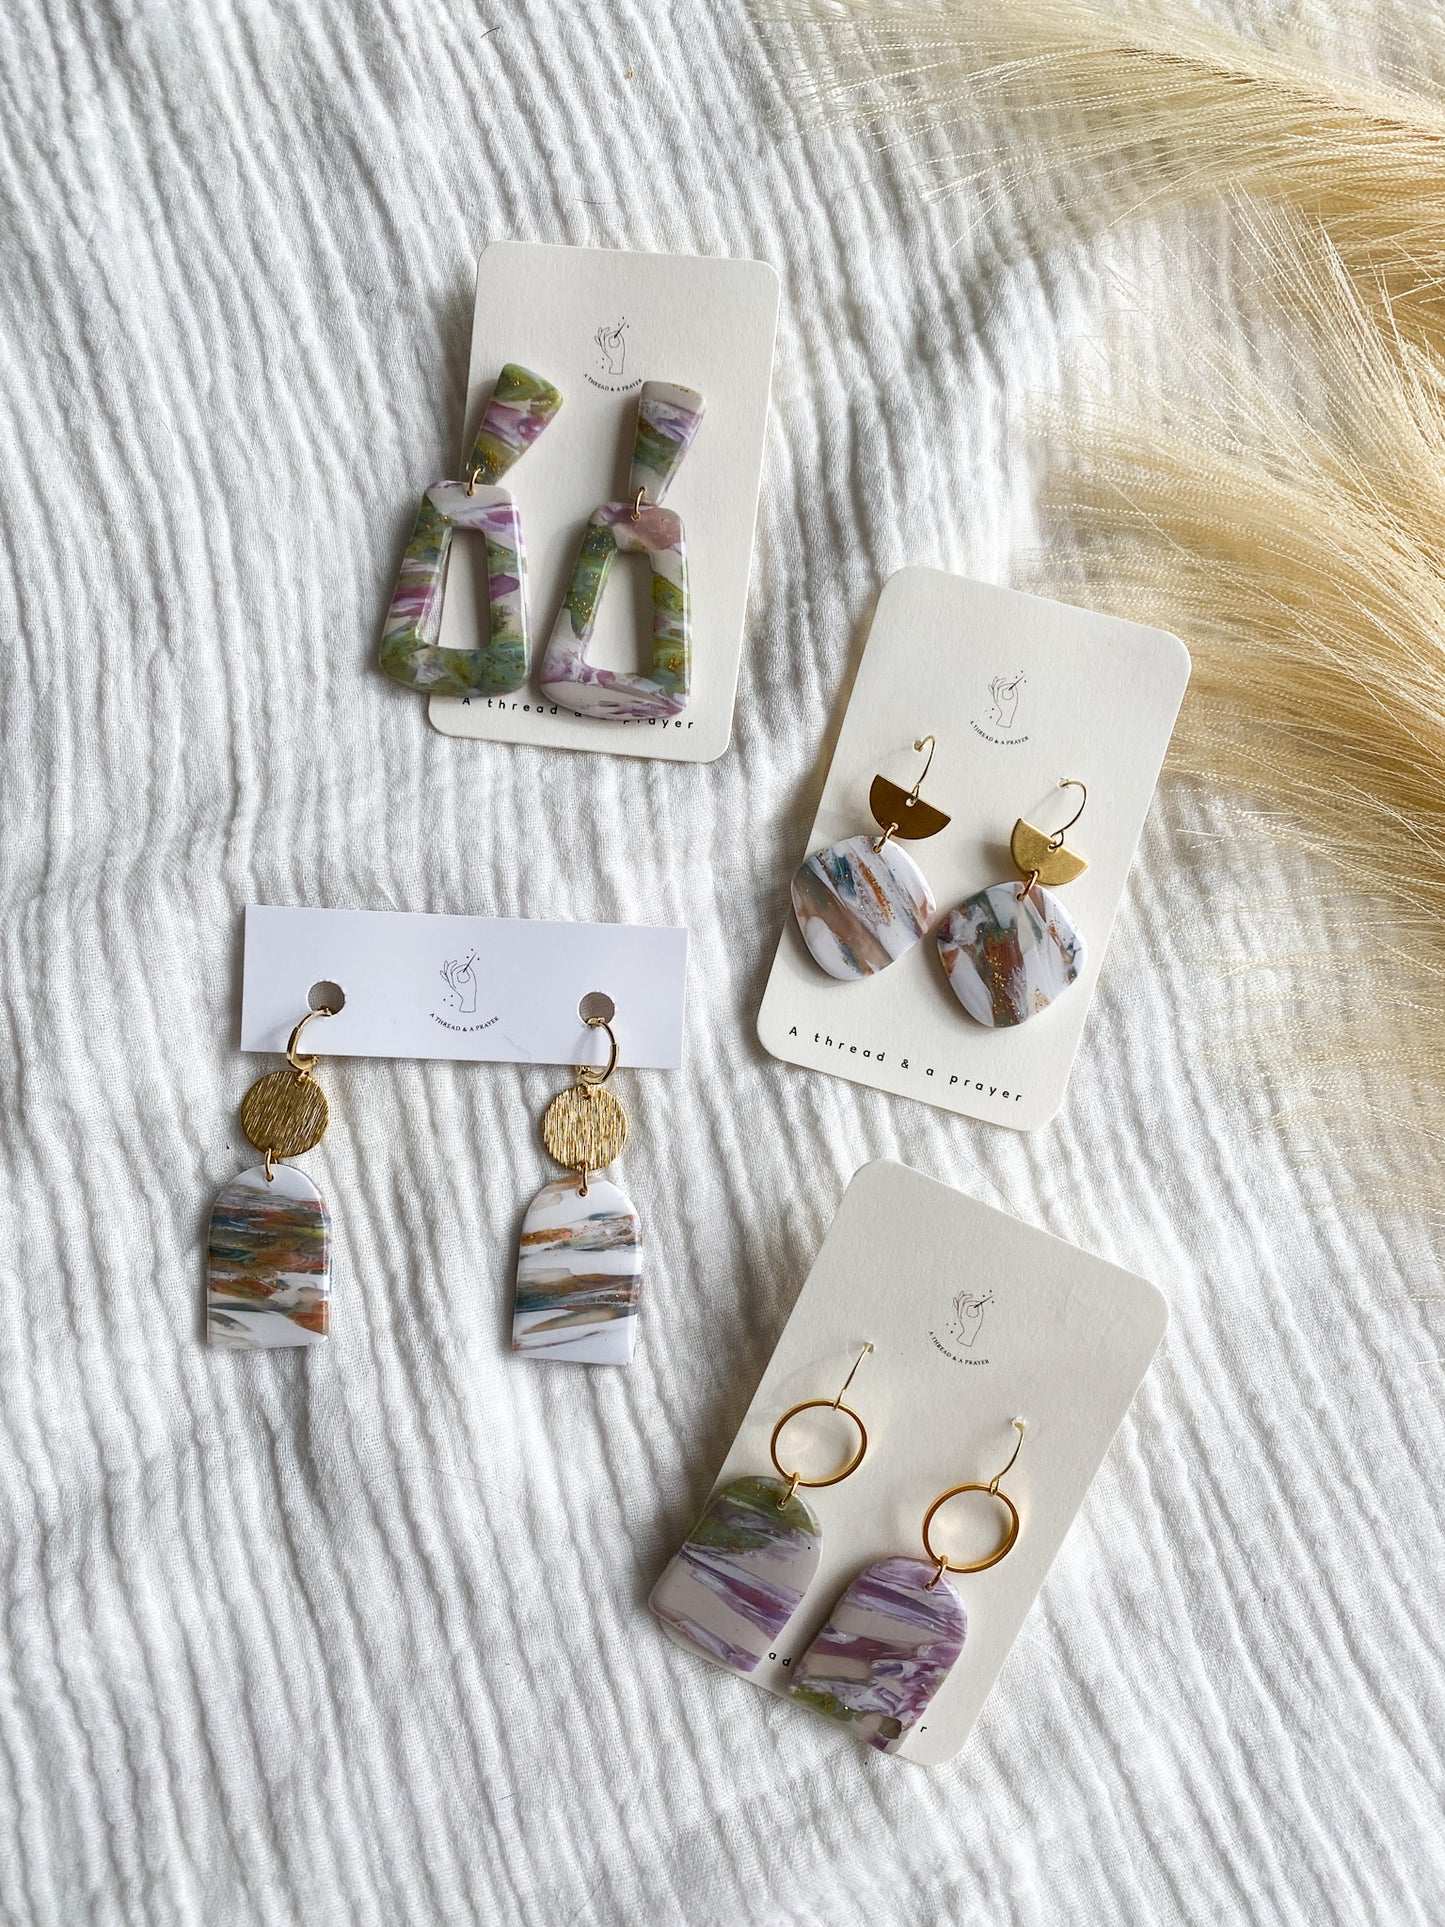 Marble Goodness Clay Earrings | Monet Inspired | Resin Earrings | Lightweight Clay Earrings